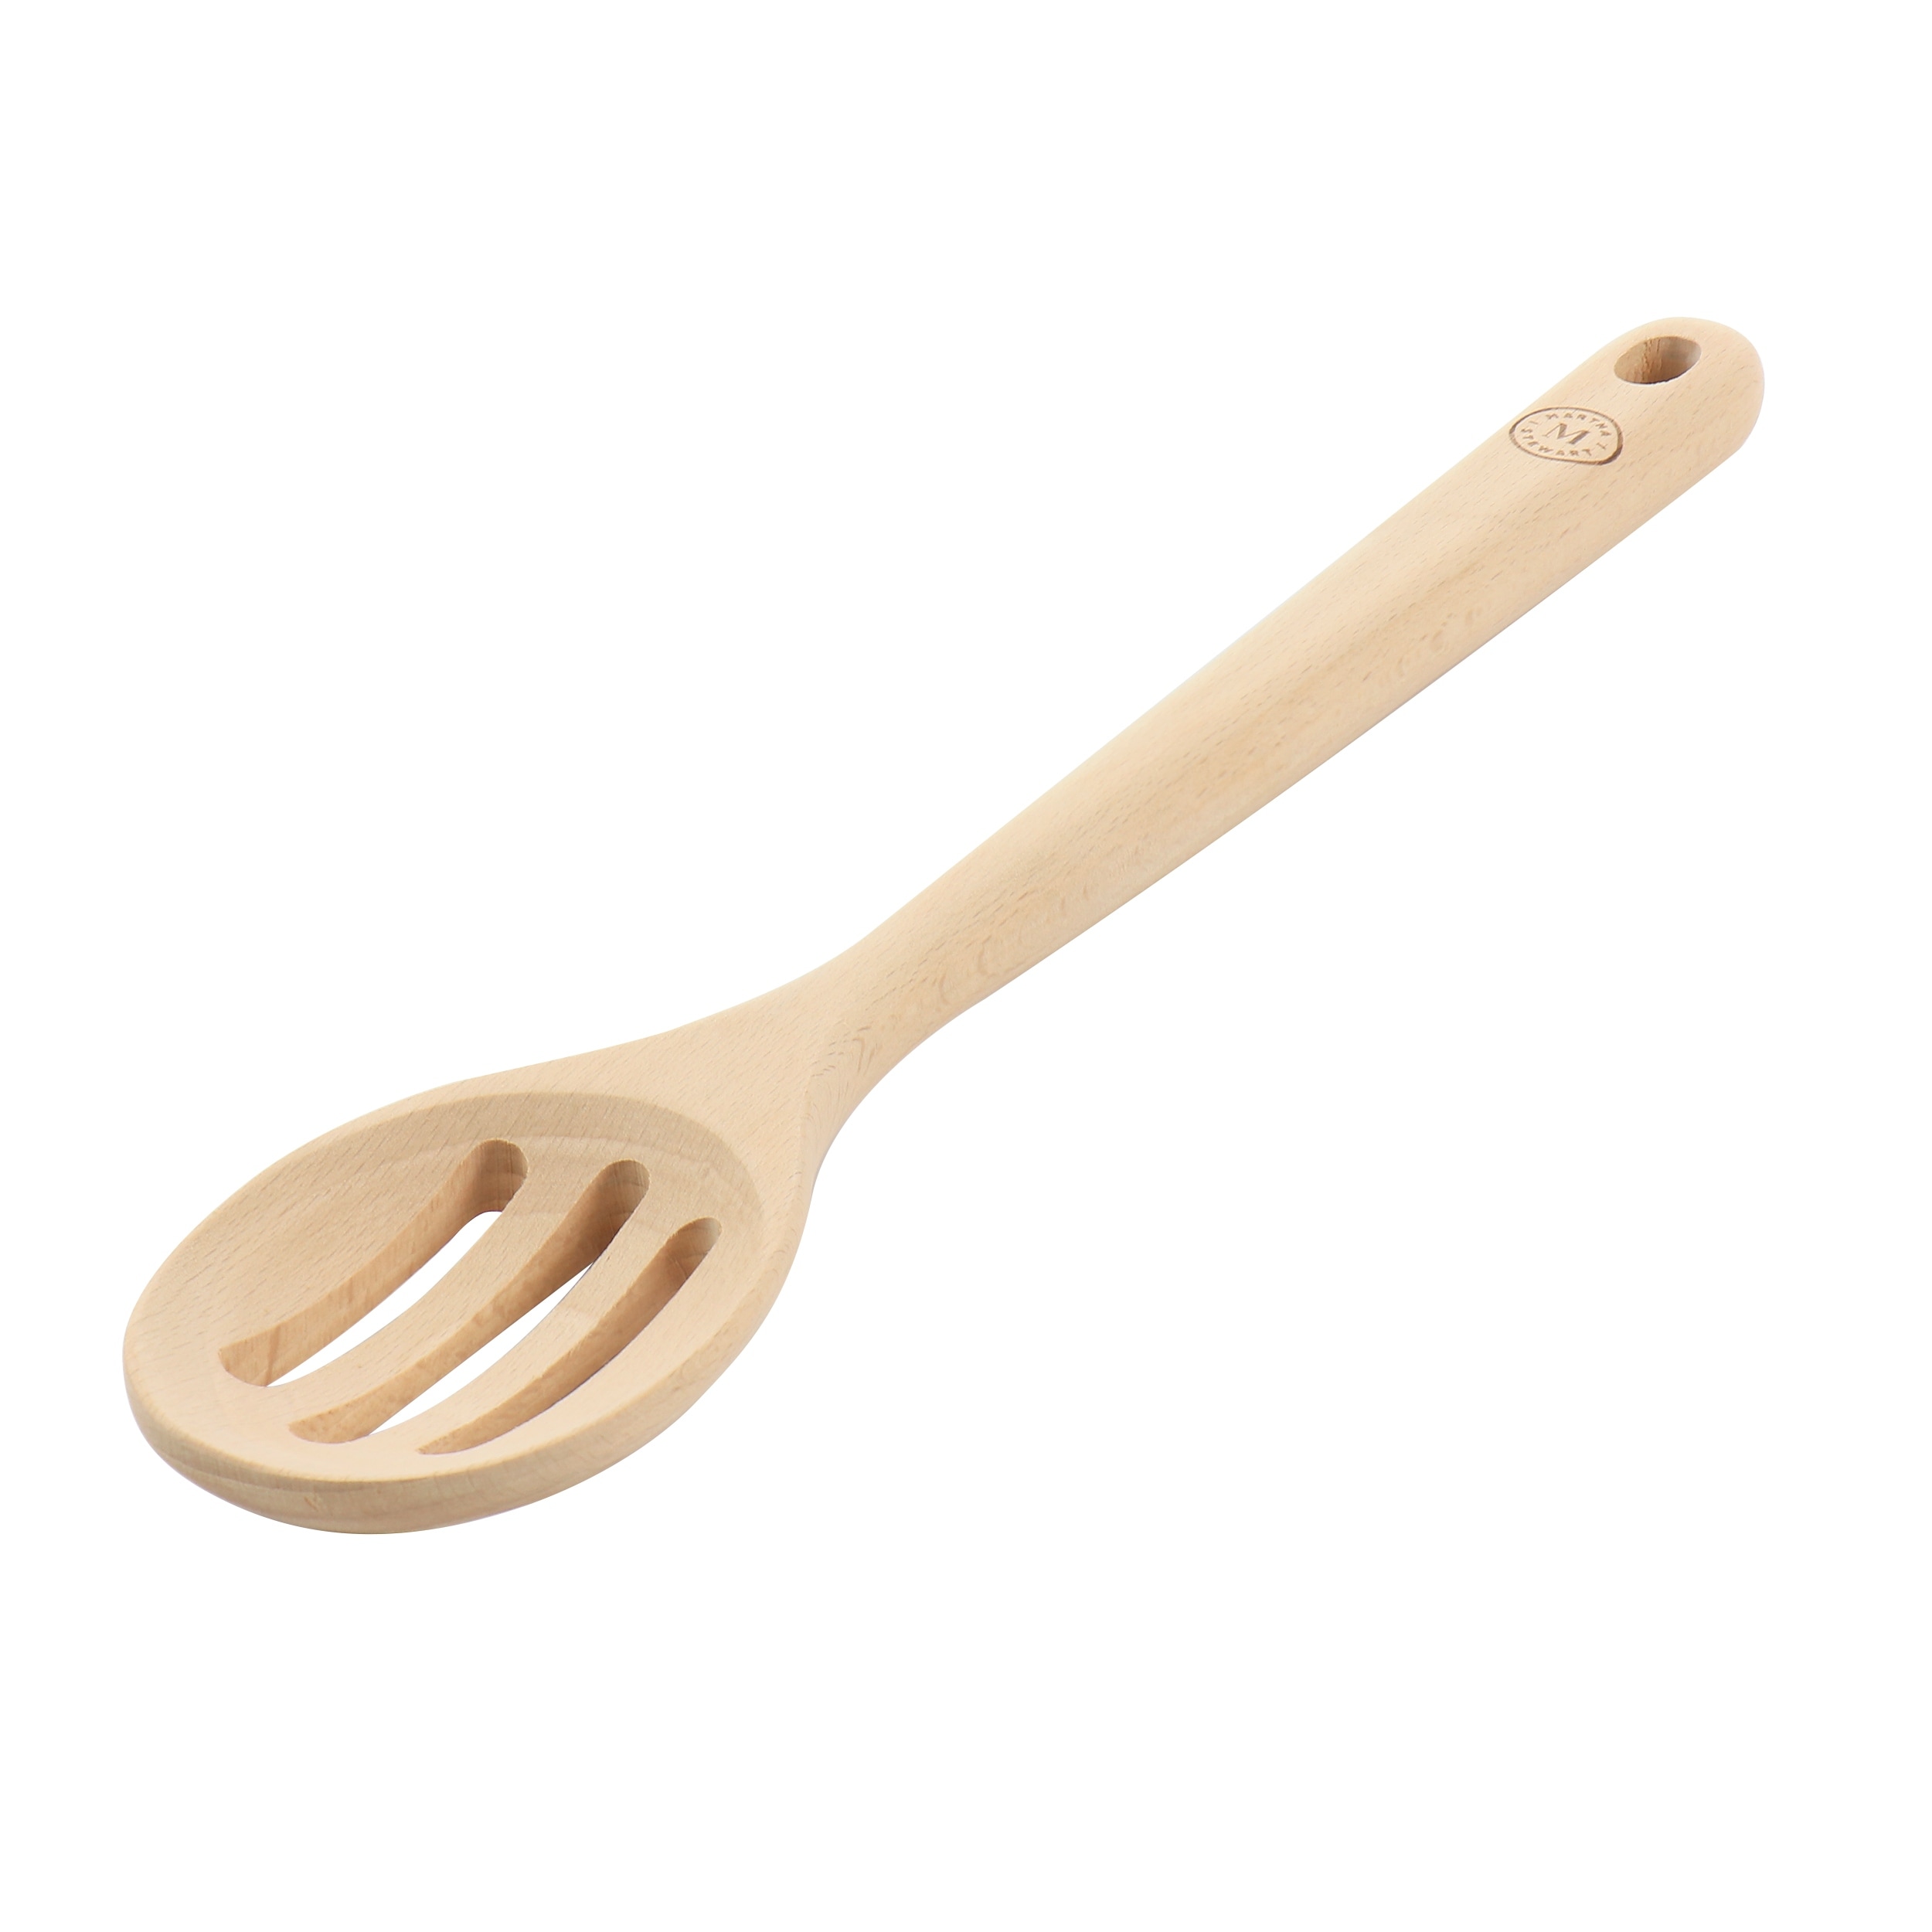 https://ak1.ostkcdn.com/images/products/is/images/direct/a82ce8d901110acaf413f127f775497ddfe54d0e/14-Inch-Beech-Wood-Slotted-Spoon.jpg